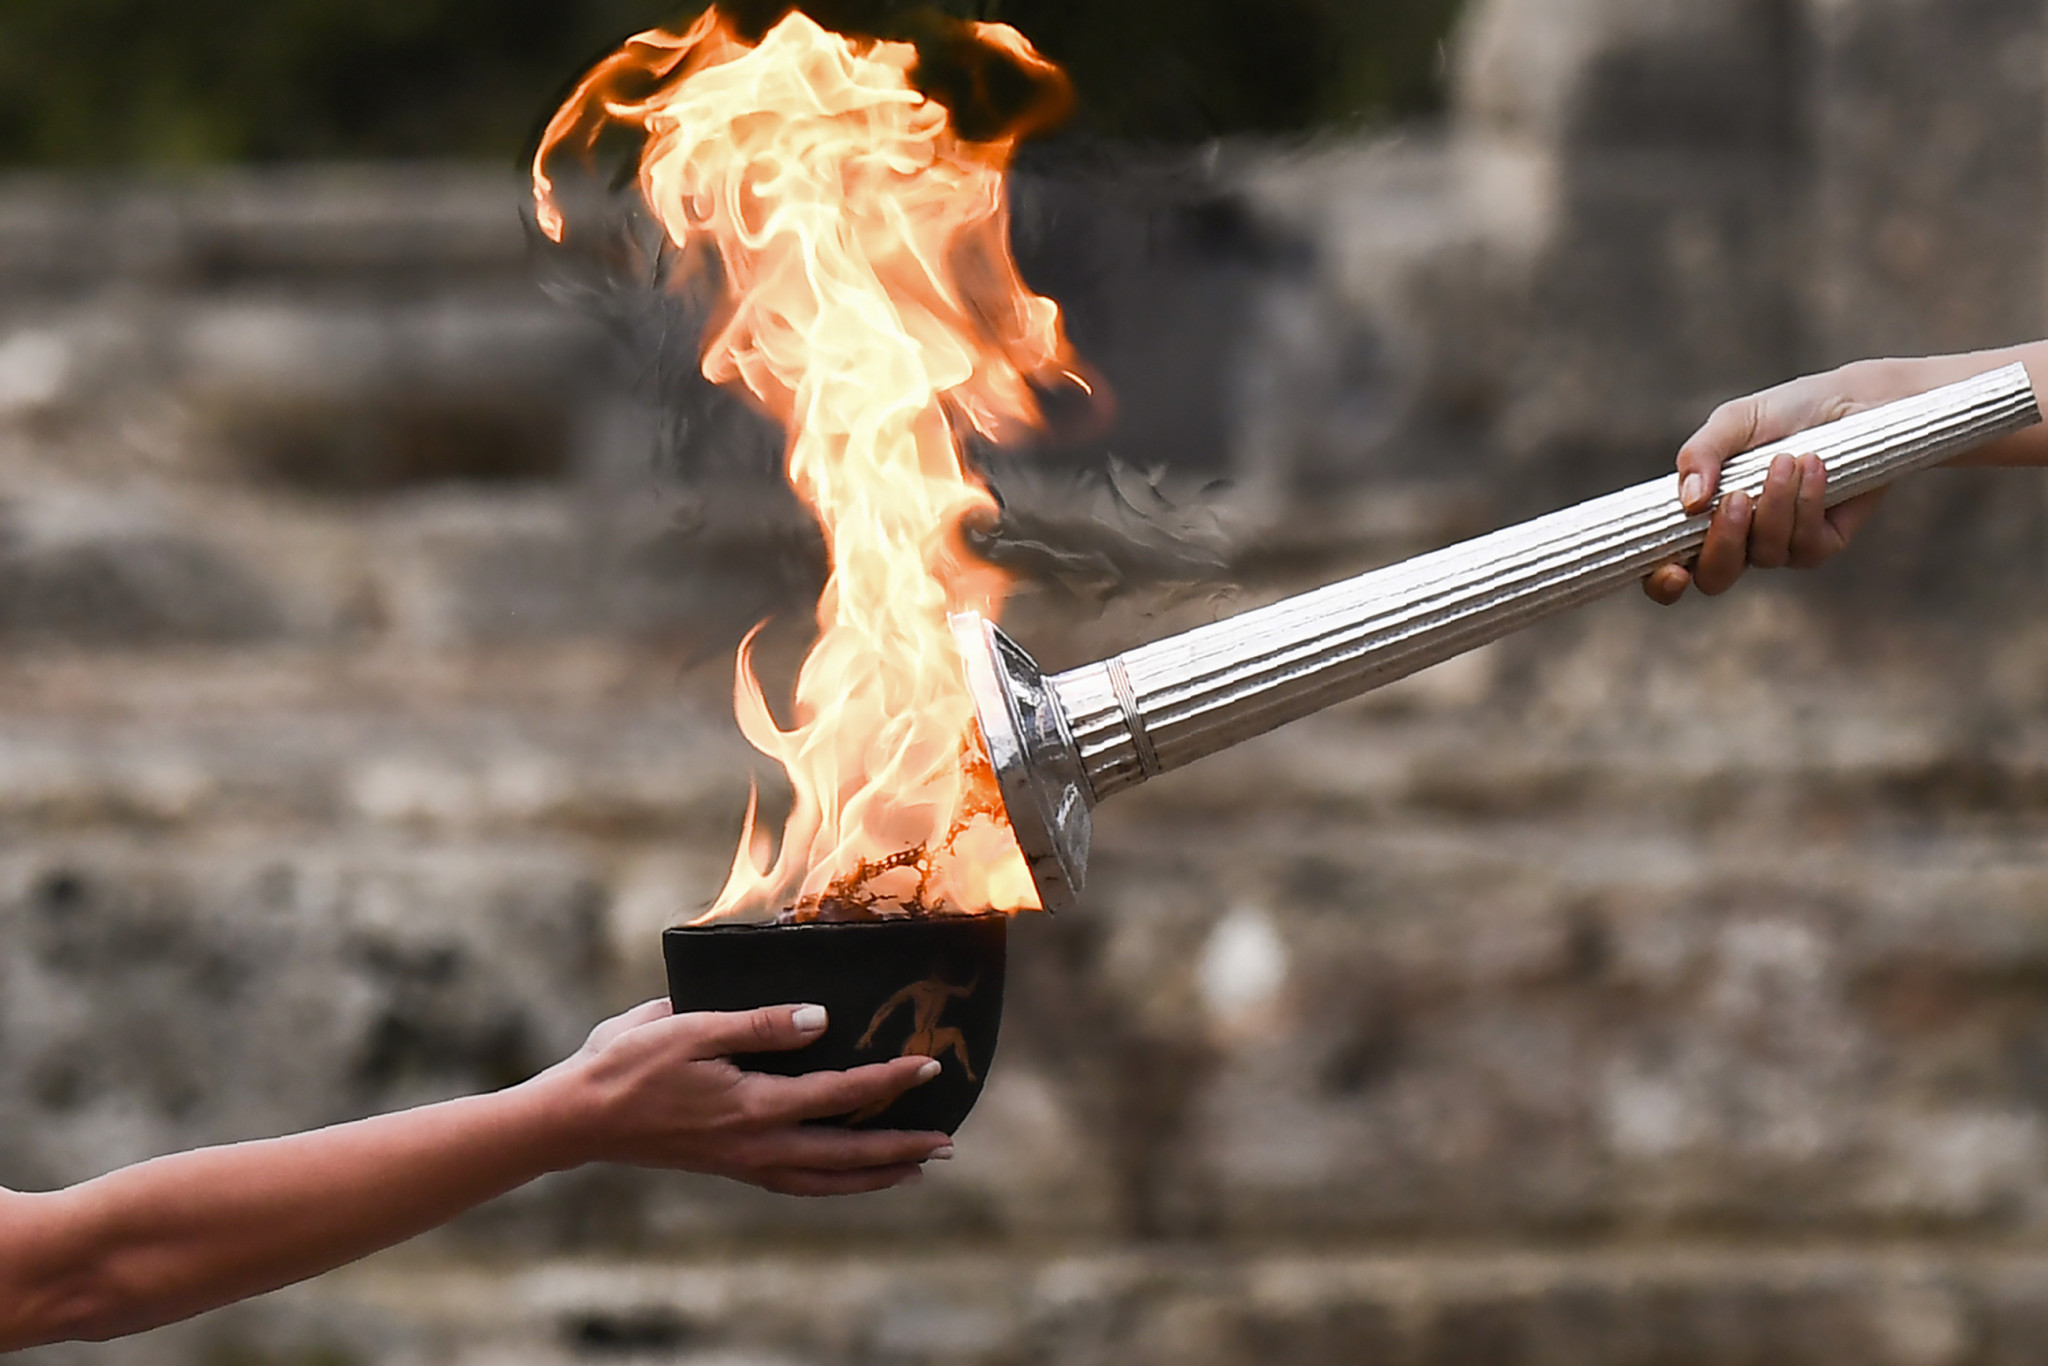 A reserve flame lit the Pyeongchang 2018 Torch today ©Getty Images 